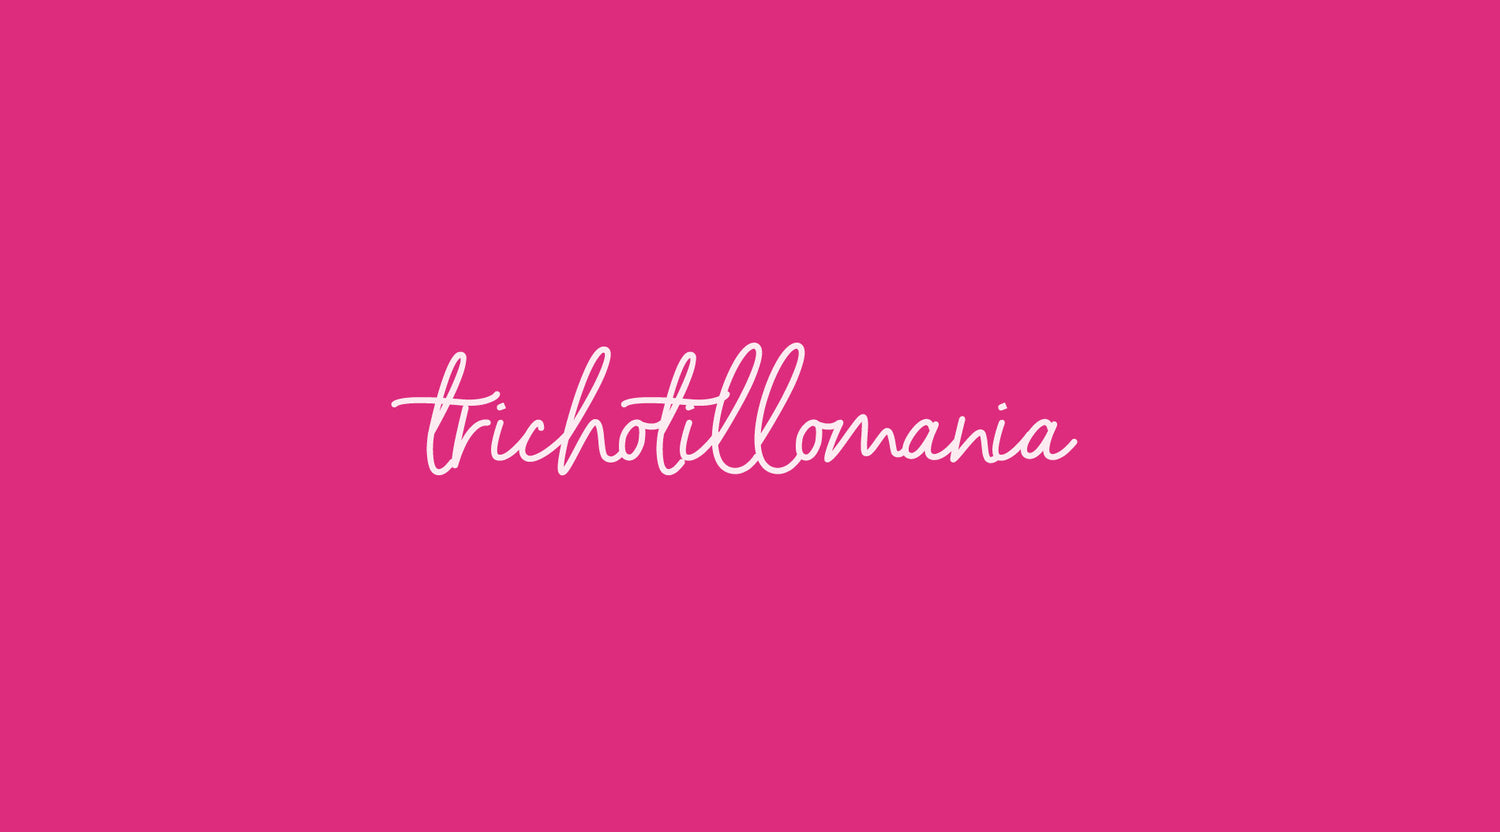 Trichotillomania - What is it?